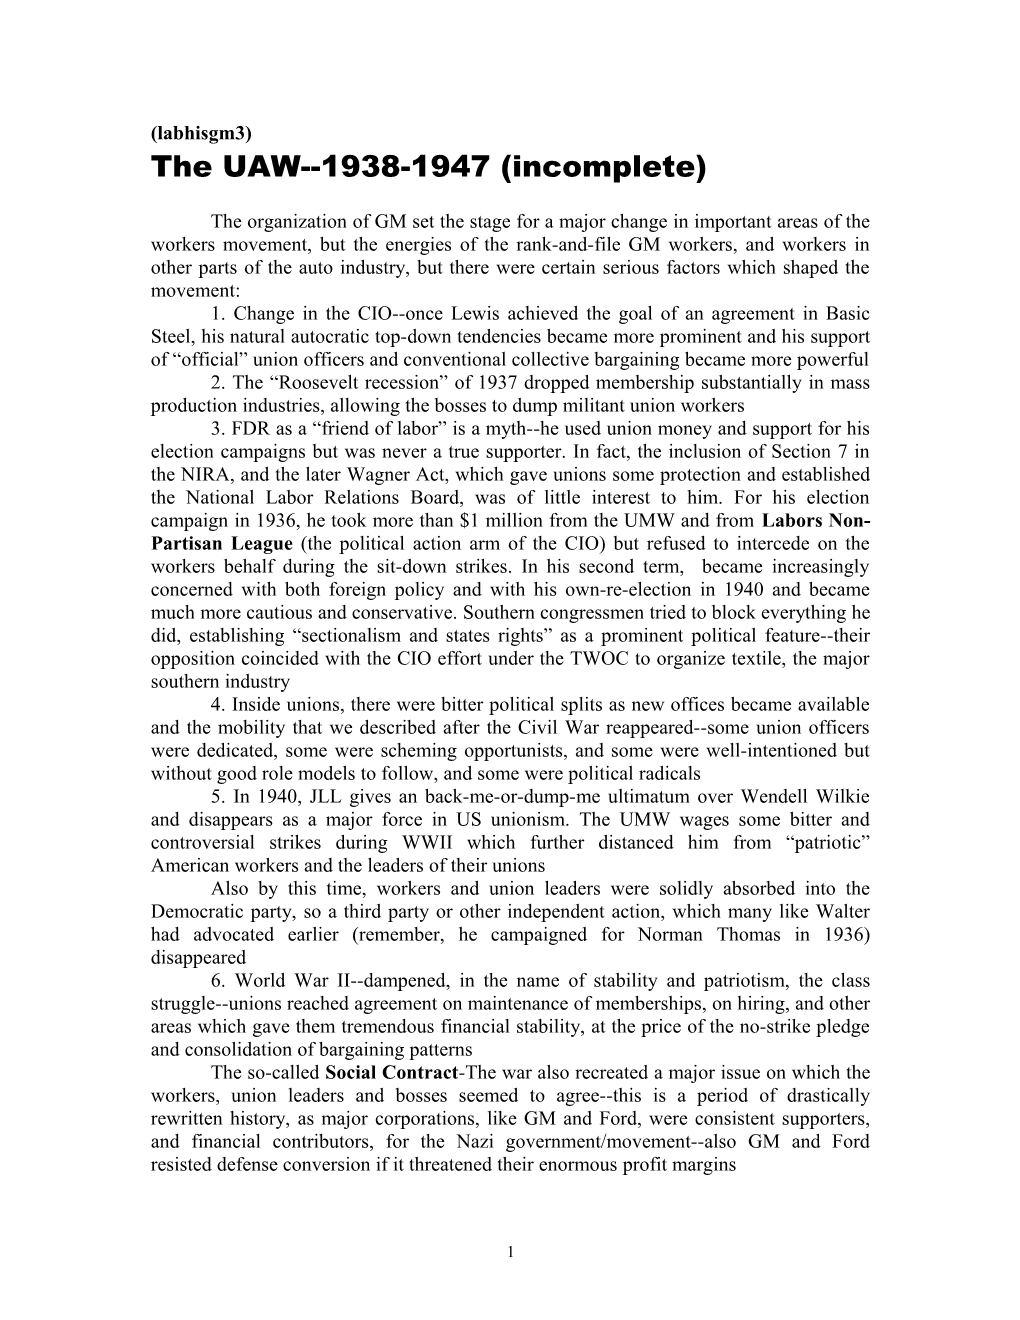 The UAW 1938-1947 (Incomplete)